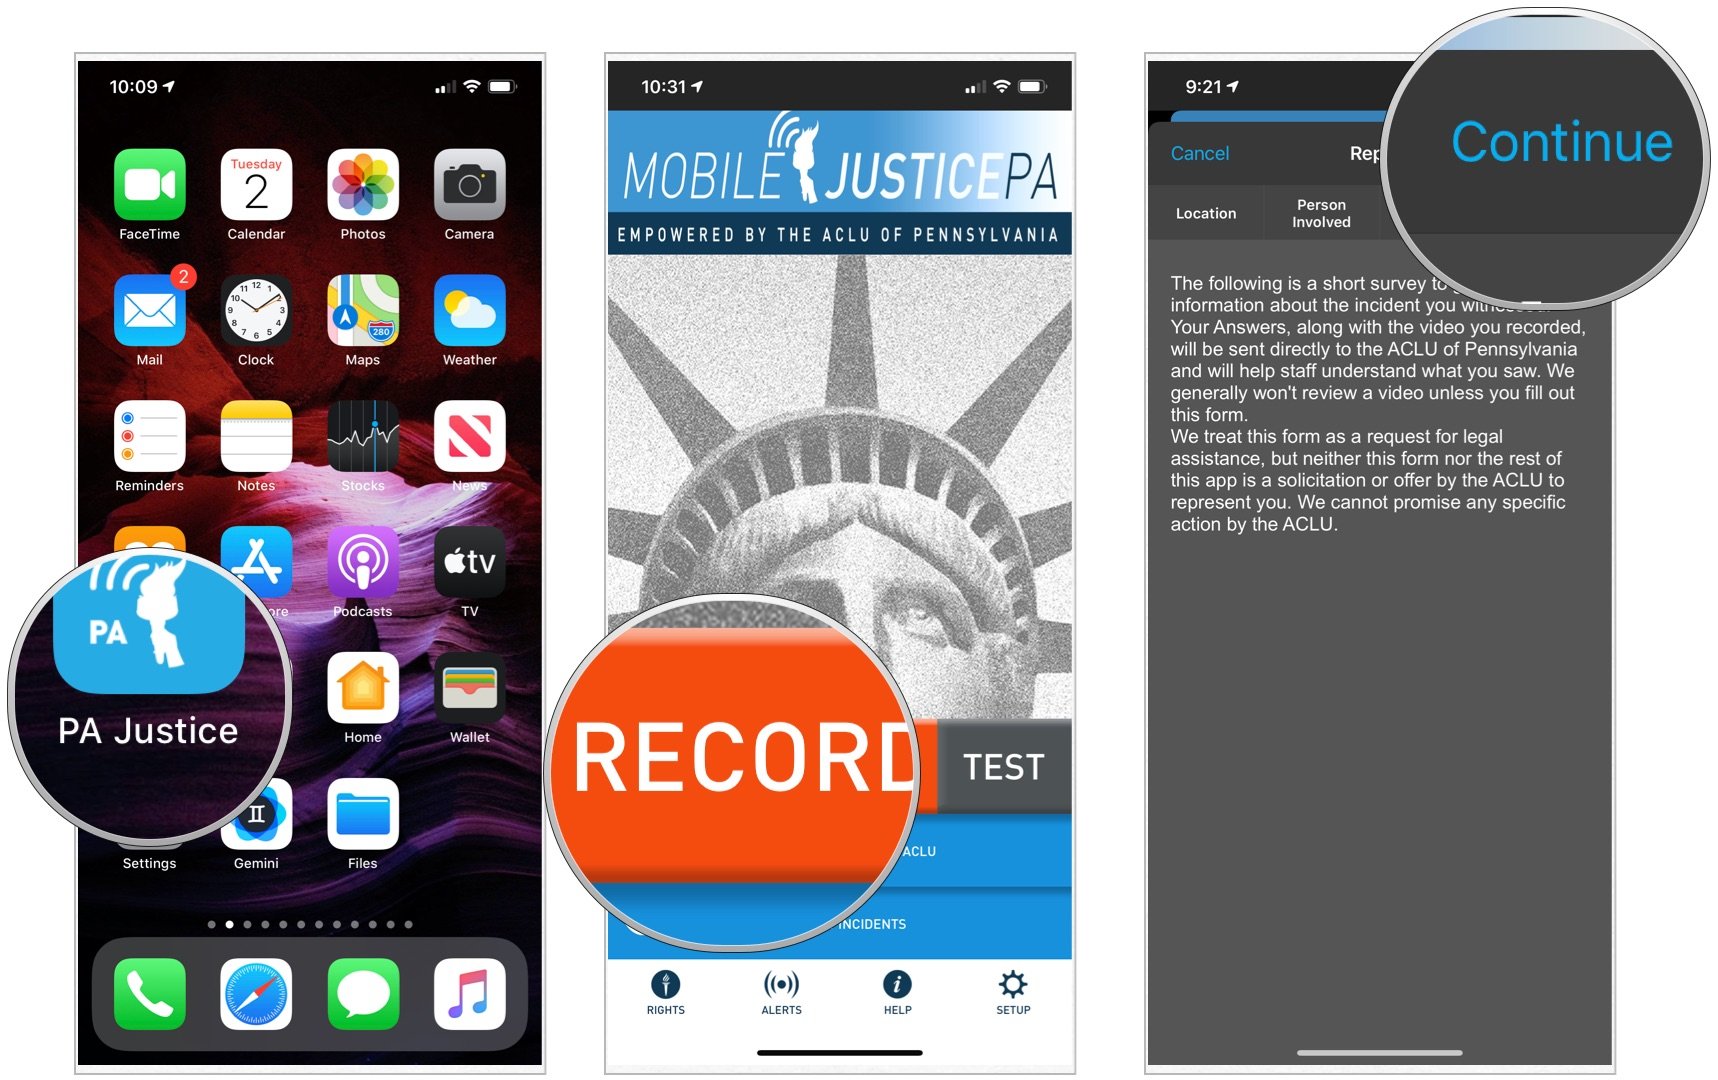 To report using the ACLU Mobile Justice app, choose the Mobile Justice app from your smartphone. Tap Report, then choose Continue. 